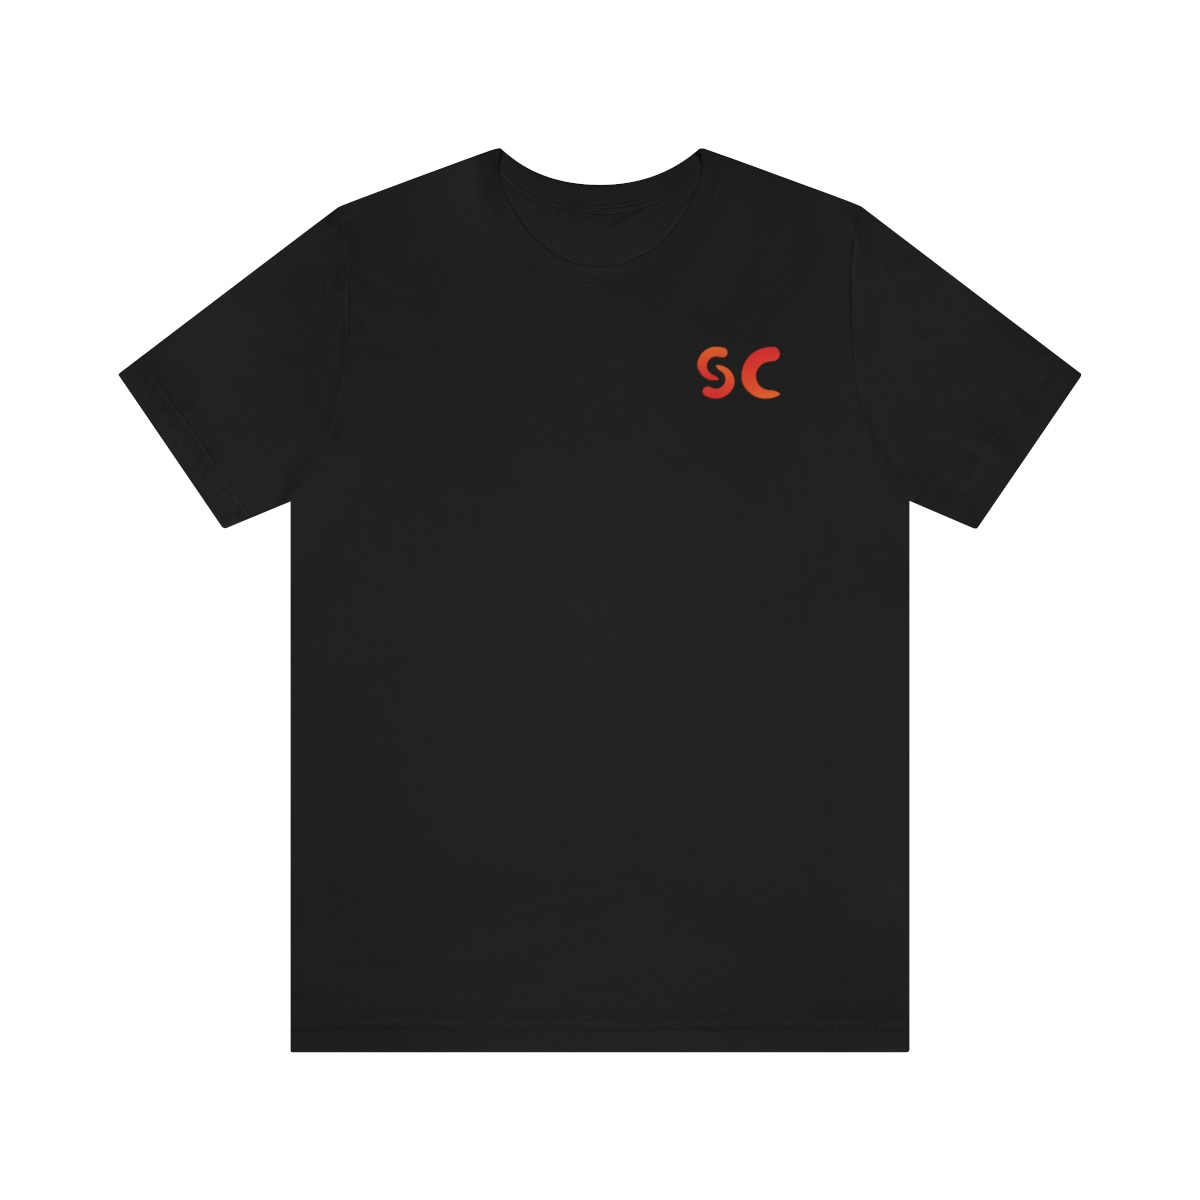 Front view of a black t-shirt with stylized "SC" over the left breast denoting sickle cell trait status.